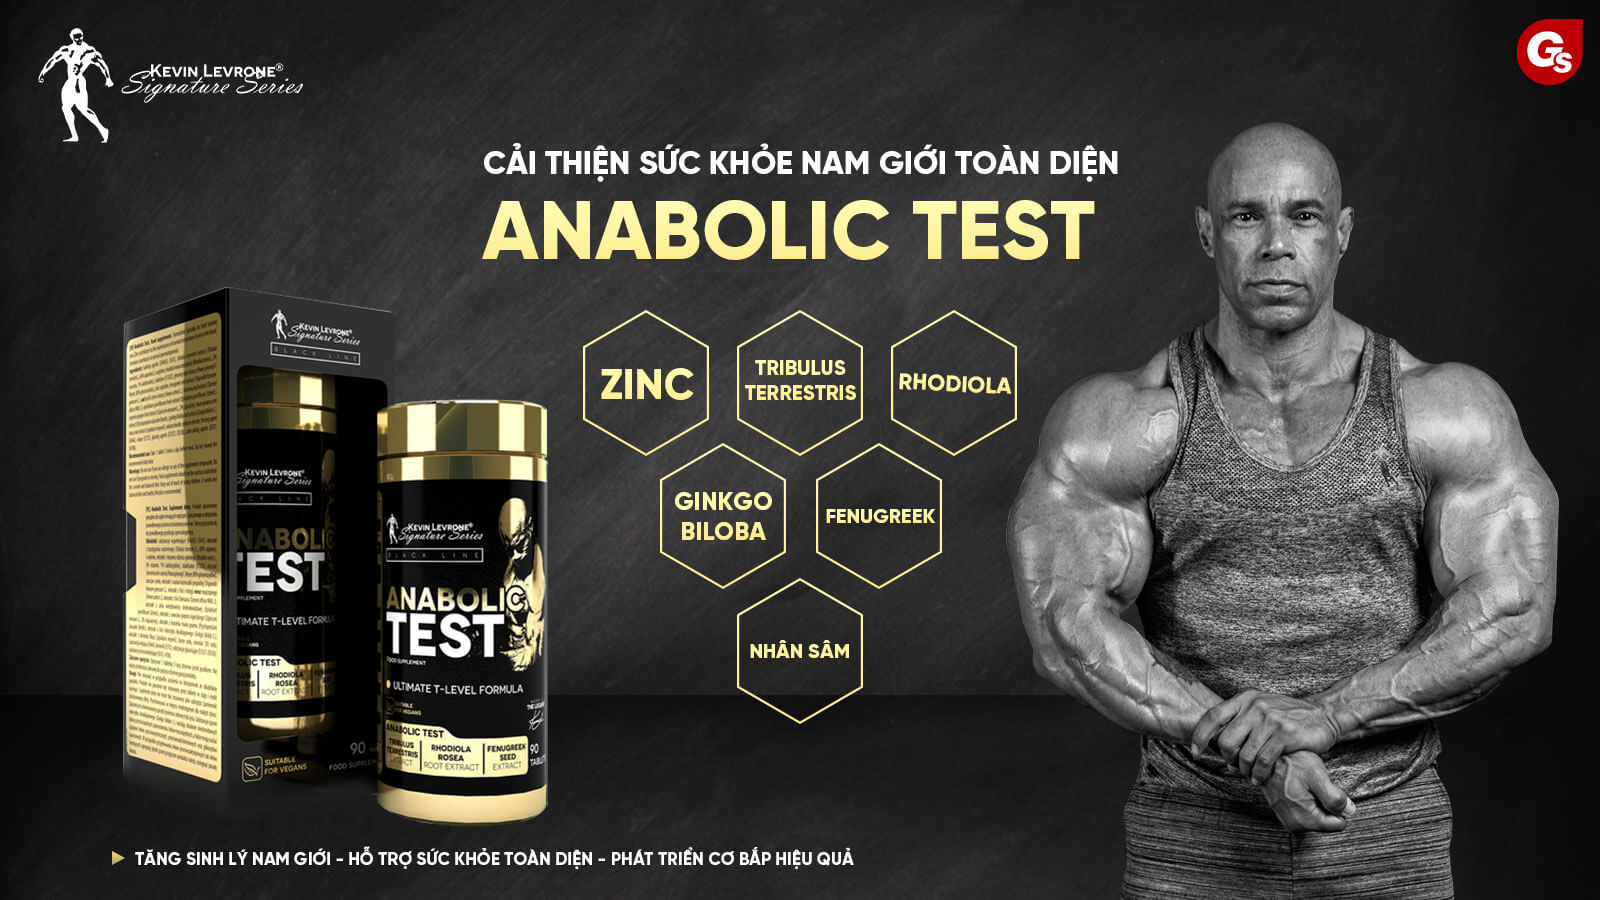 kevin-levrone-anabolic-test-tang-testosterol-gymstore